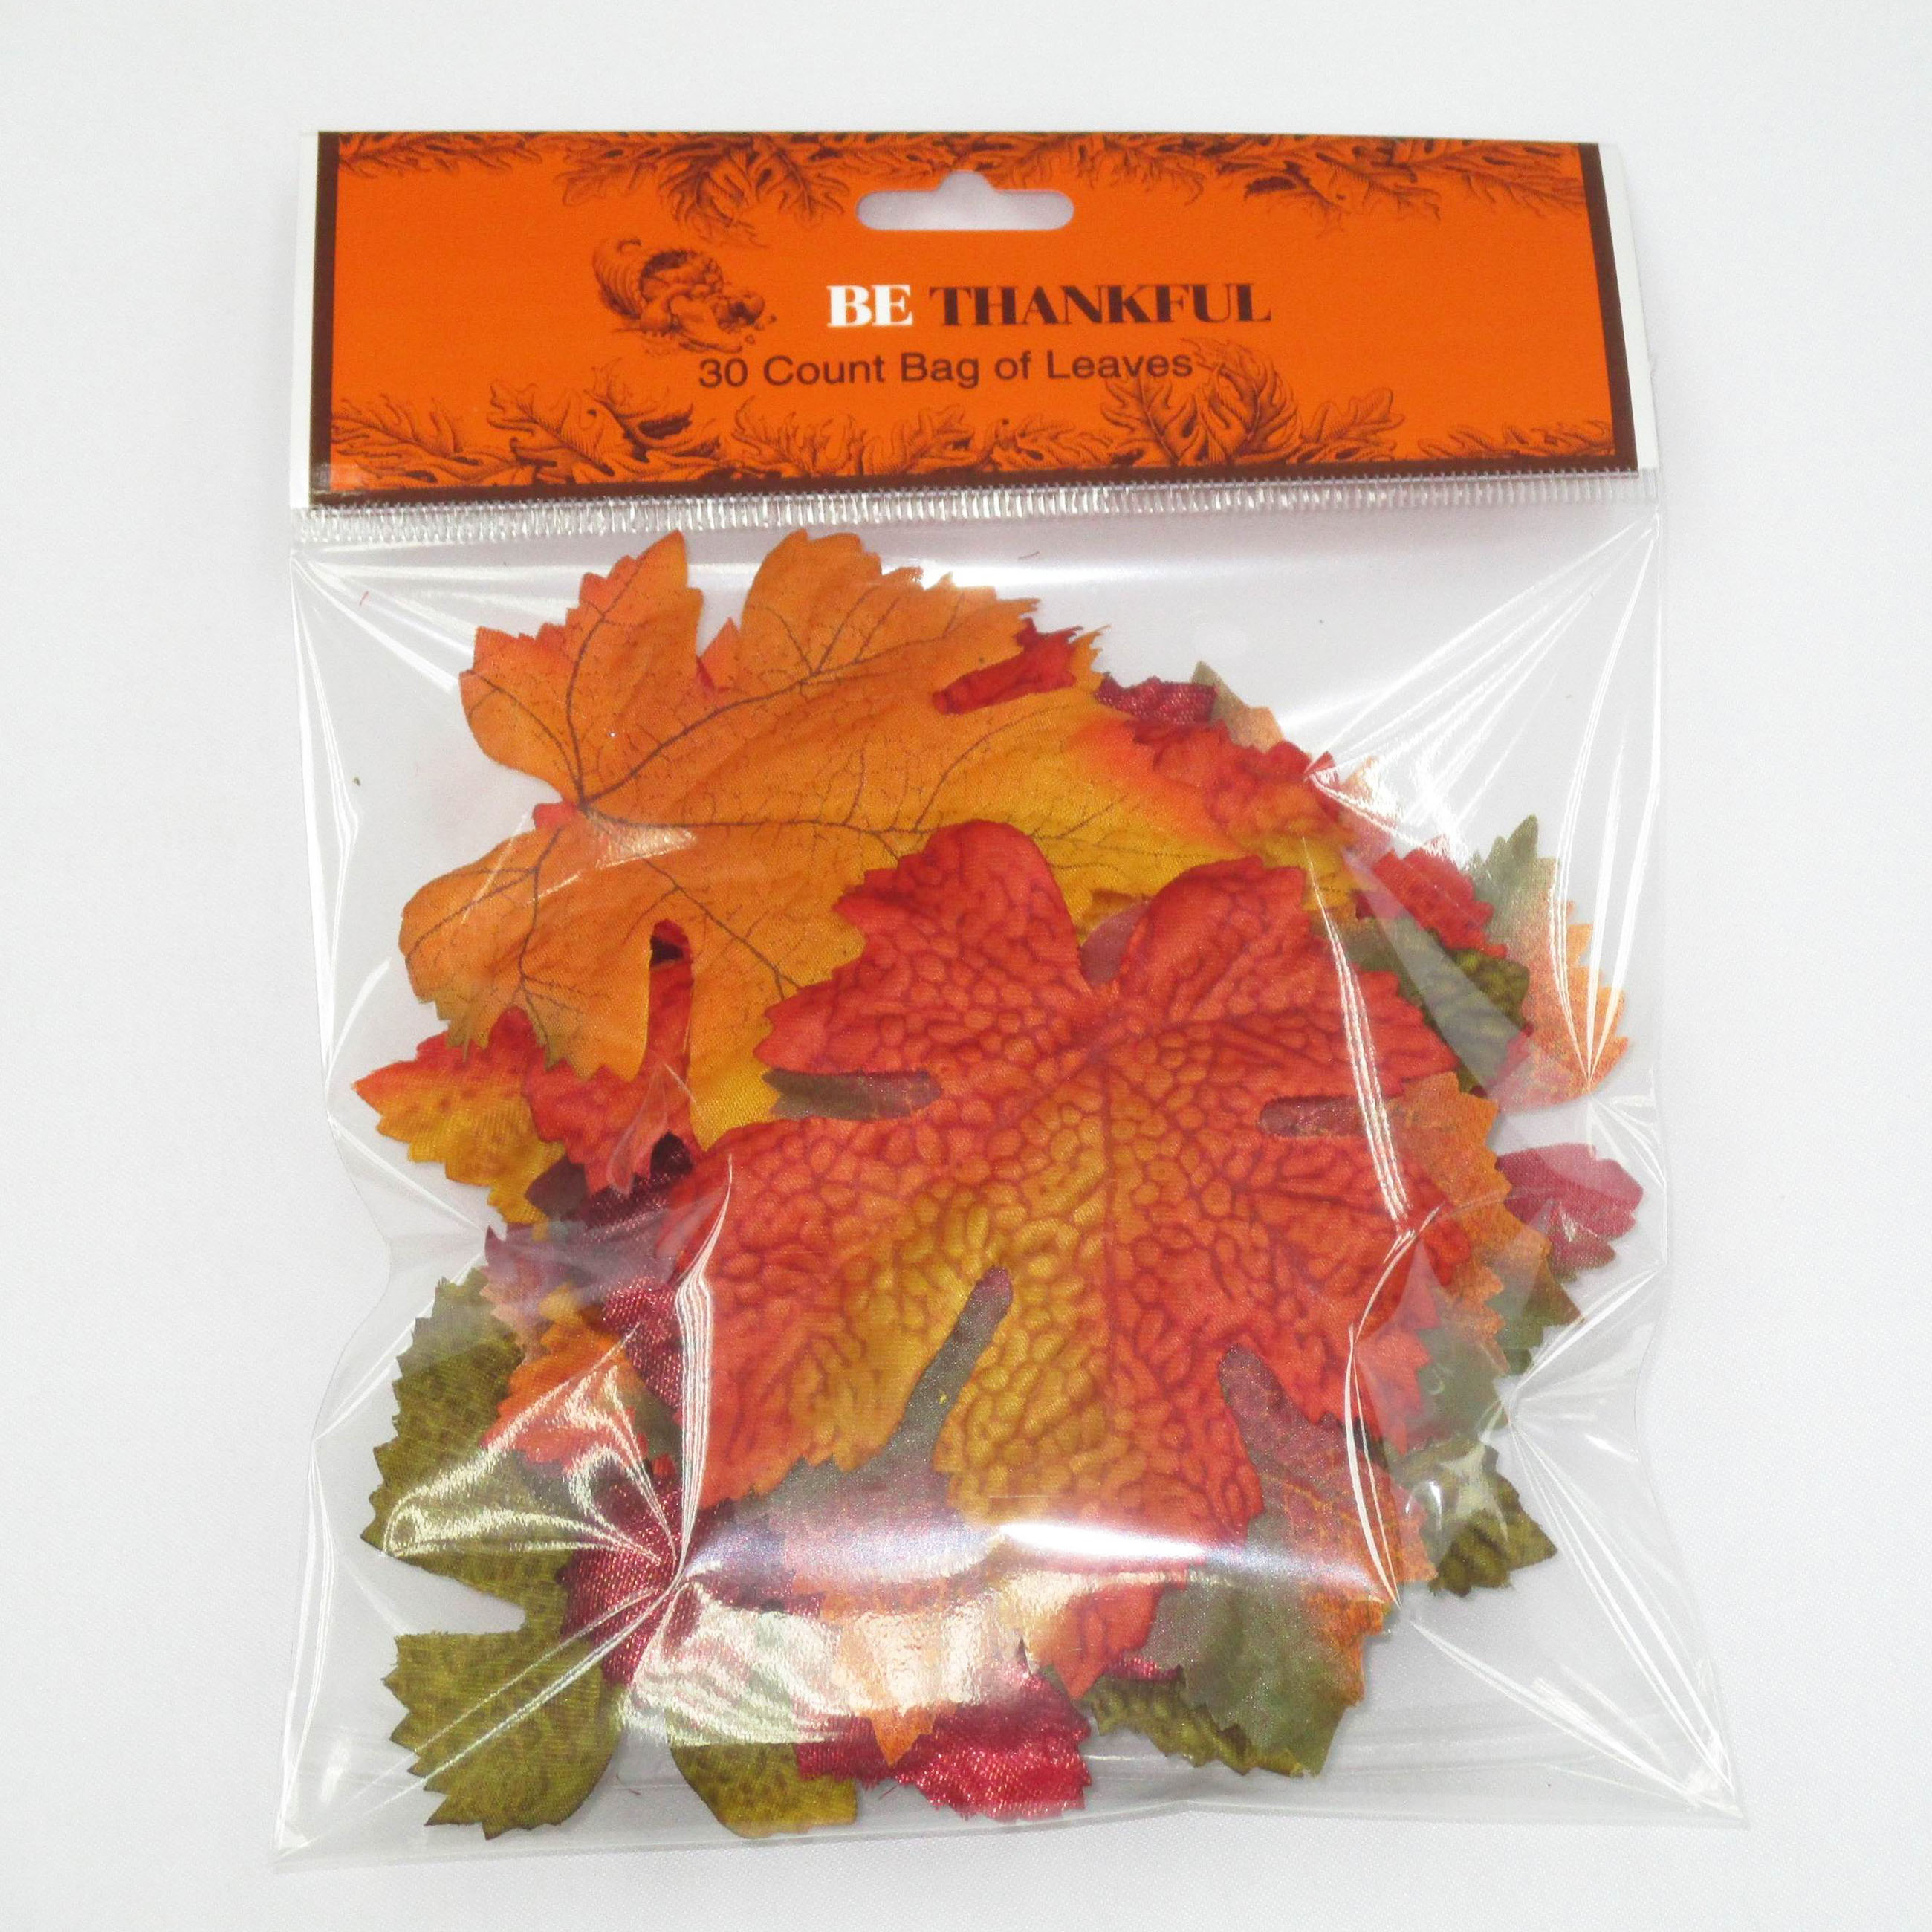 Be Thankful Bag of Harvest Leaves, 30 Count